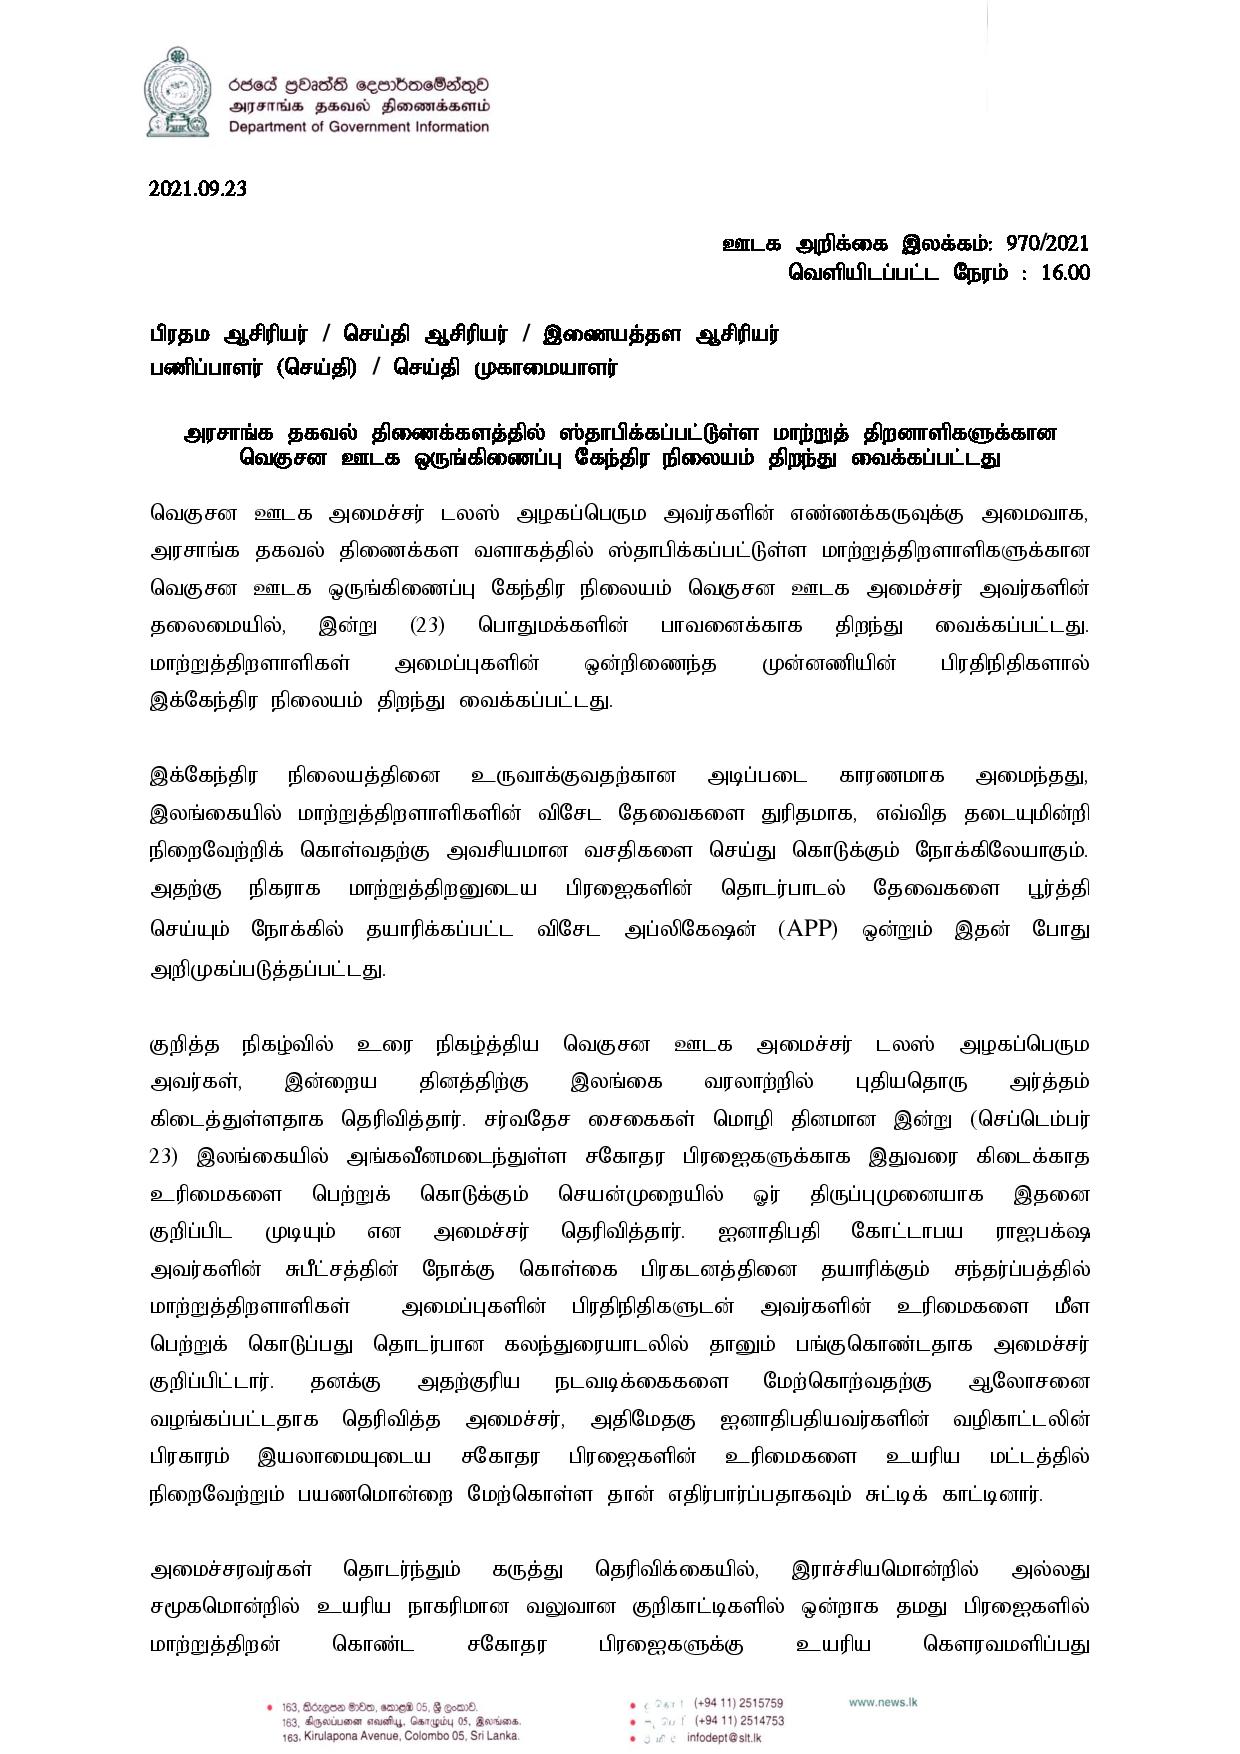 Press Release 970 Tamil page 001